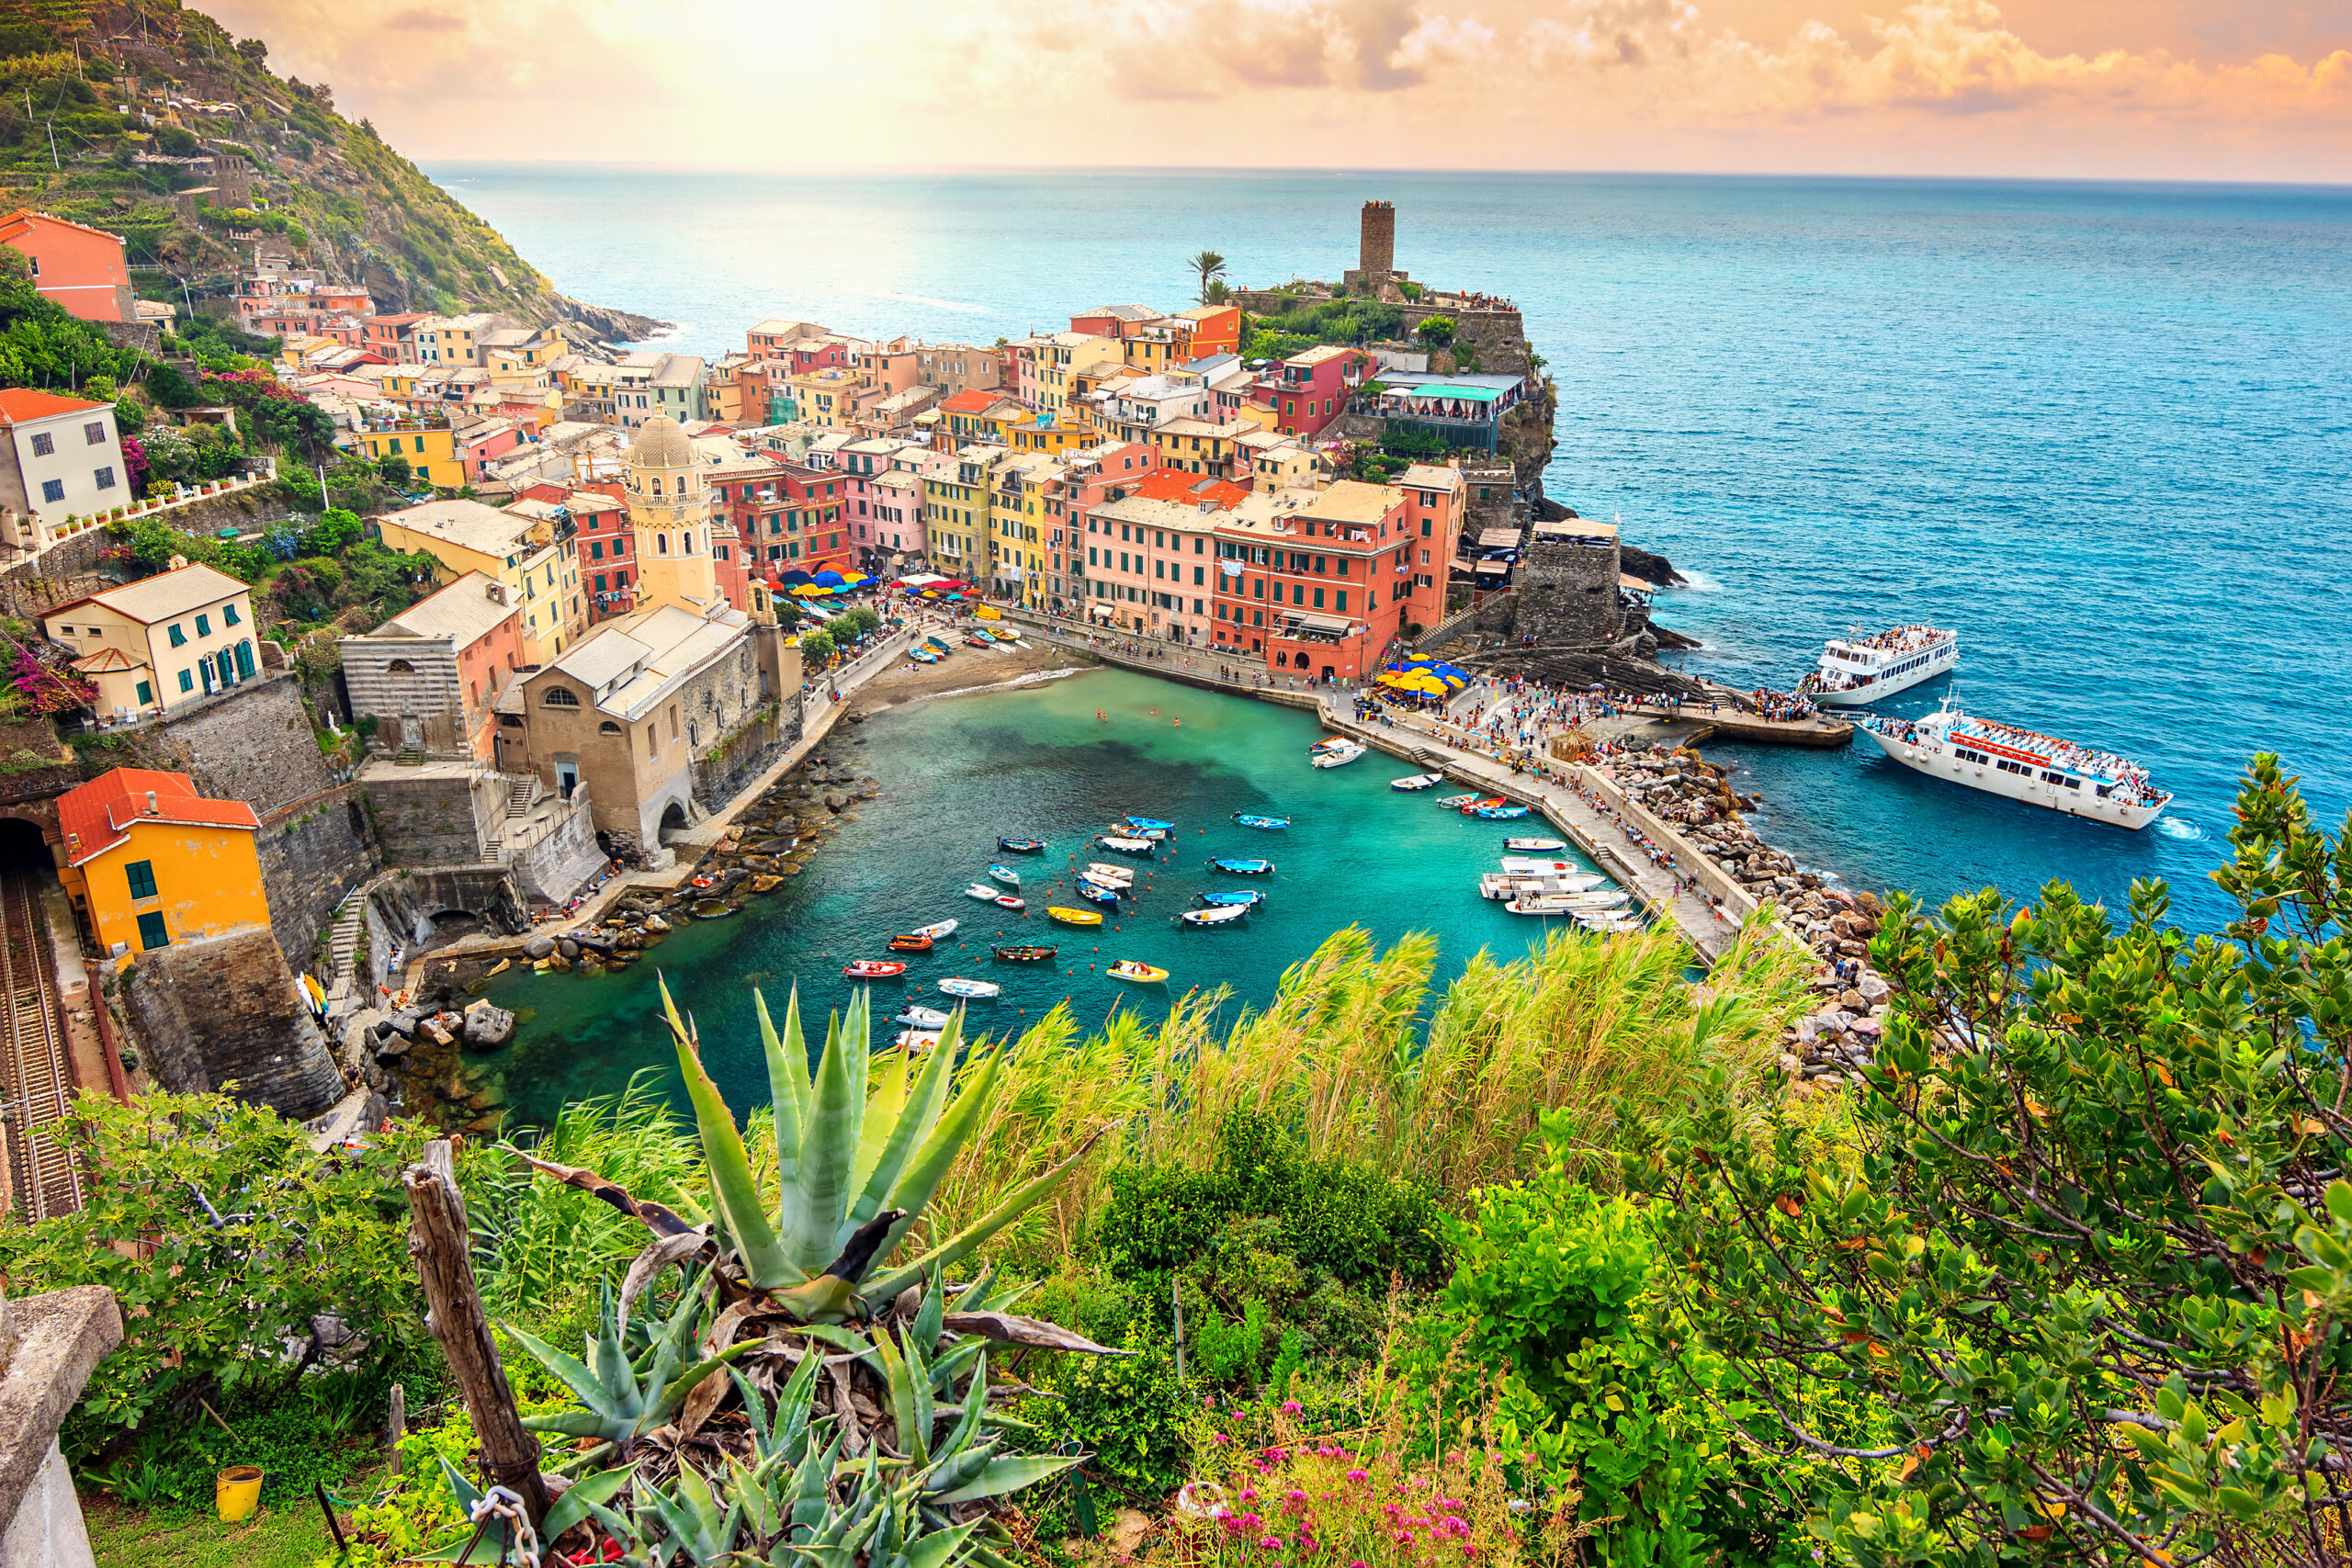 Amazing view of a colorful Cinque Terre beach and village surrounded by greenery, mountains, and little boats 